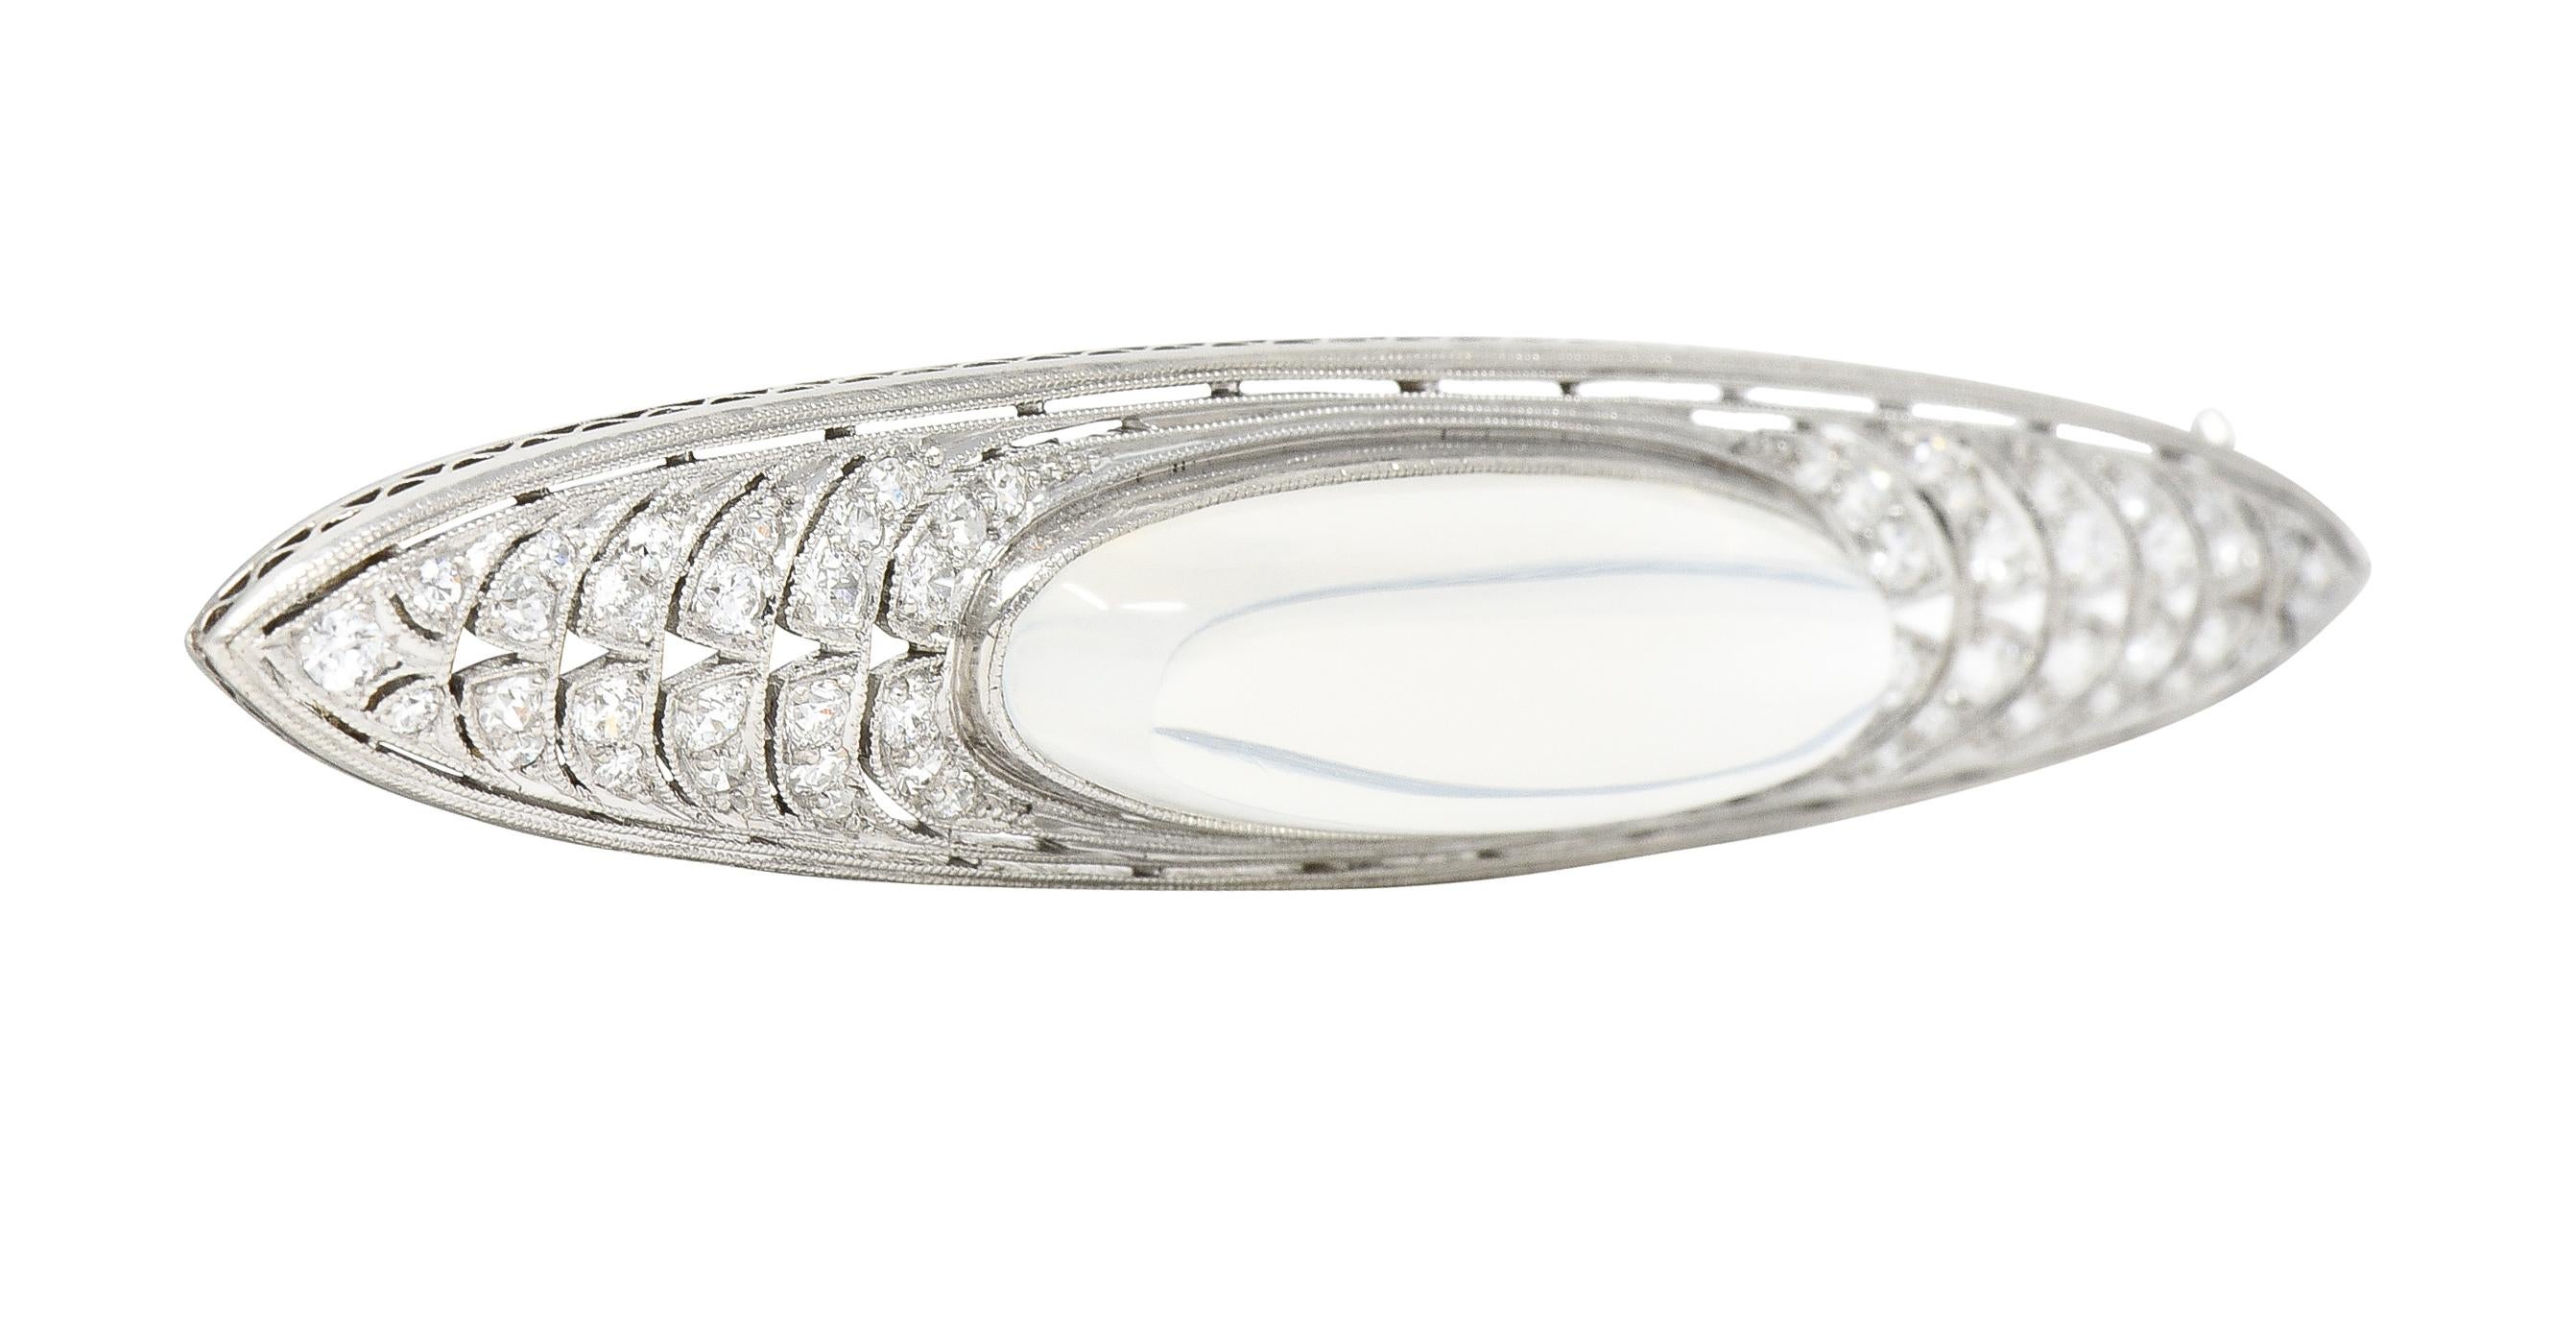 Centering an elongated sugarloaf-shaped moonstone cabochon measuring 27.0 x 9.0 mm 
Translucent colorless in body with white adularescence - bezel set
Featuring a pierced arching surround bead set with rows of graduated old European cut diamonds